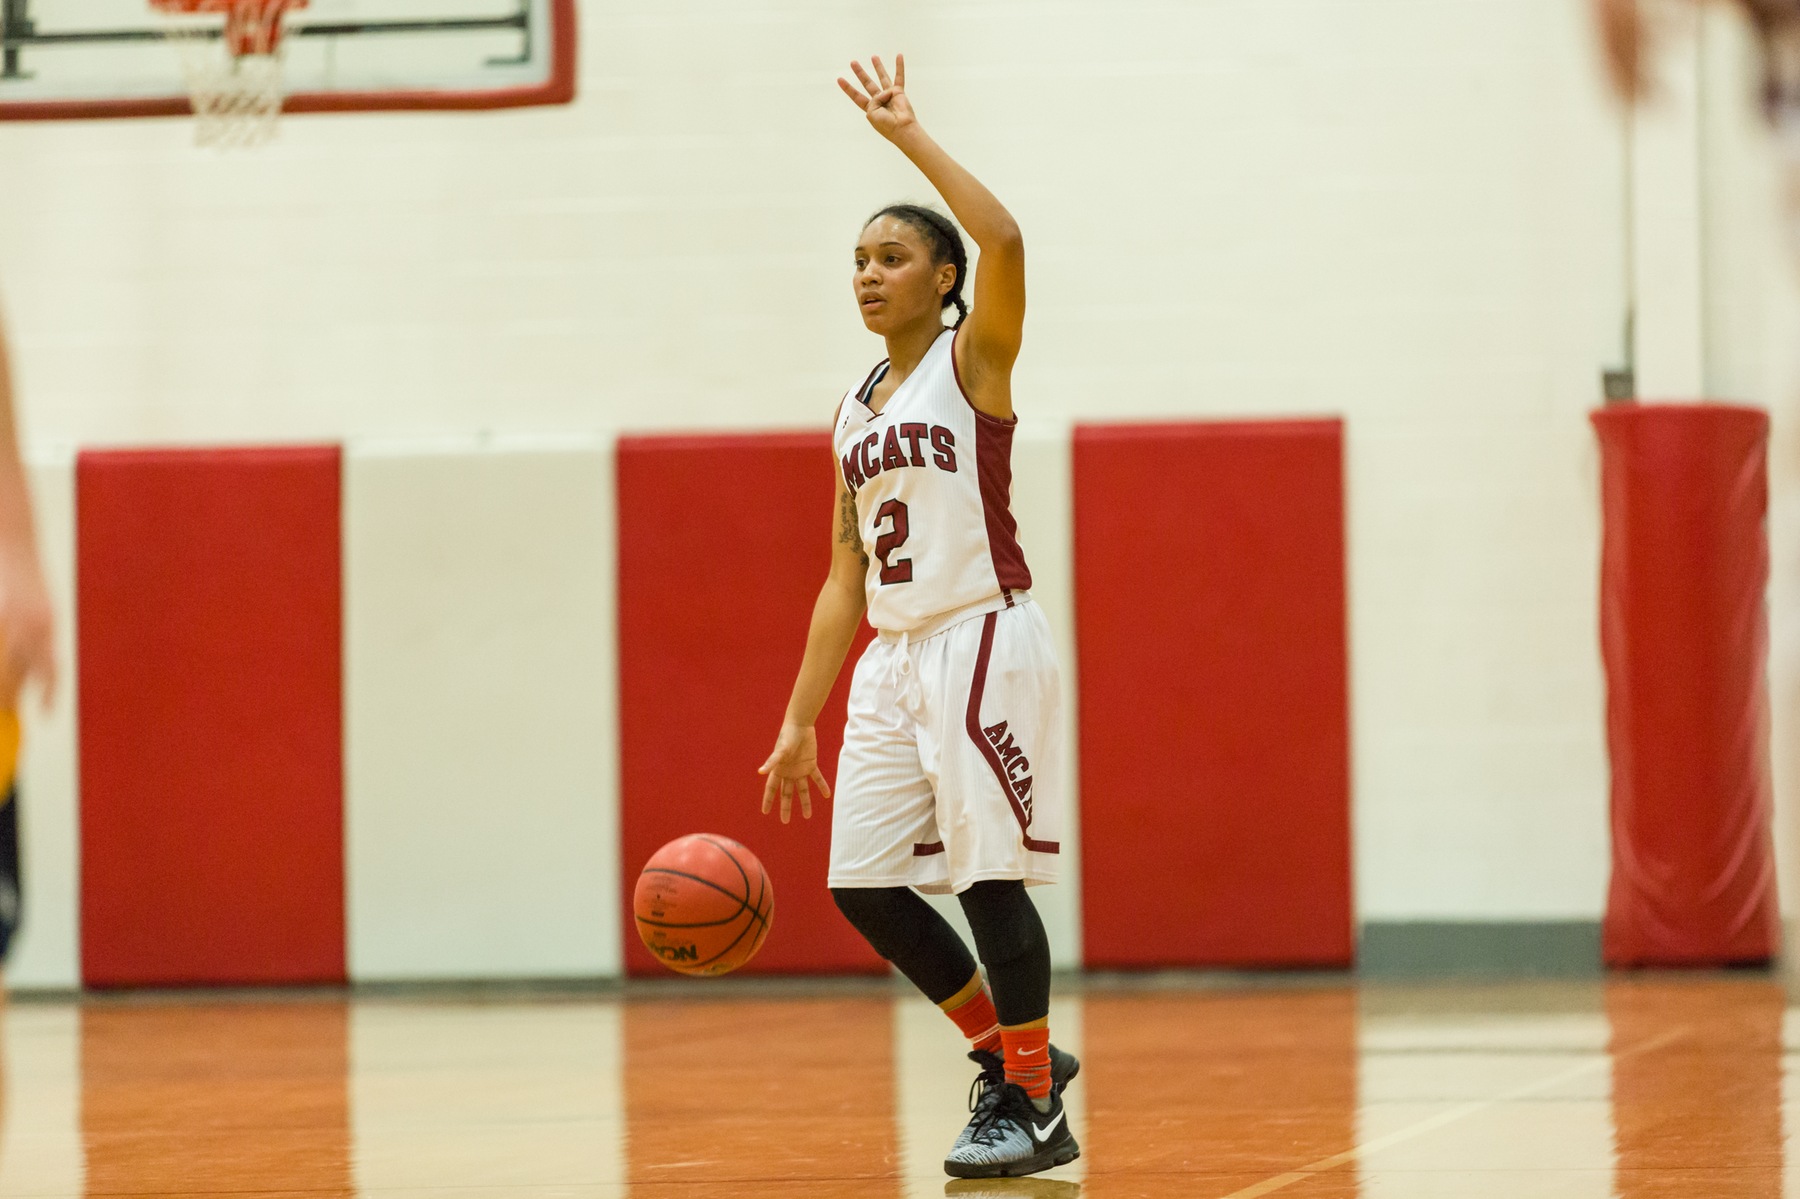 Women's Basketball Drops to Lasell, 68-61